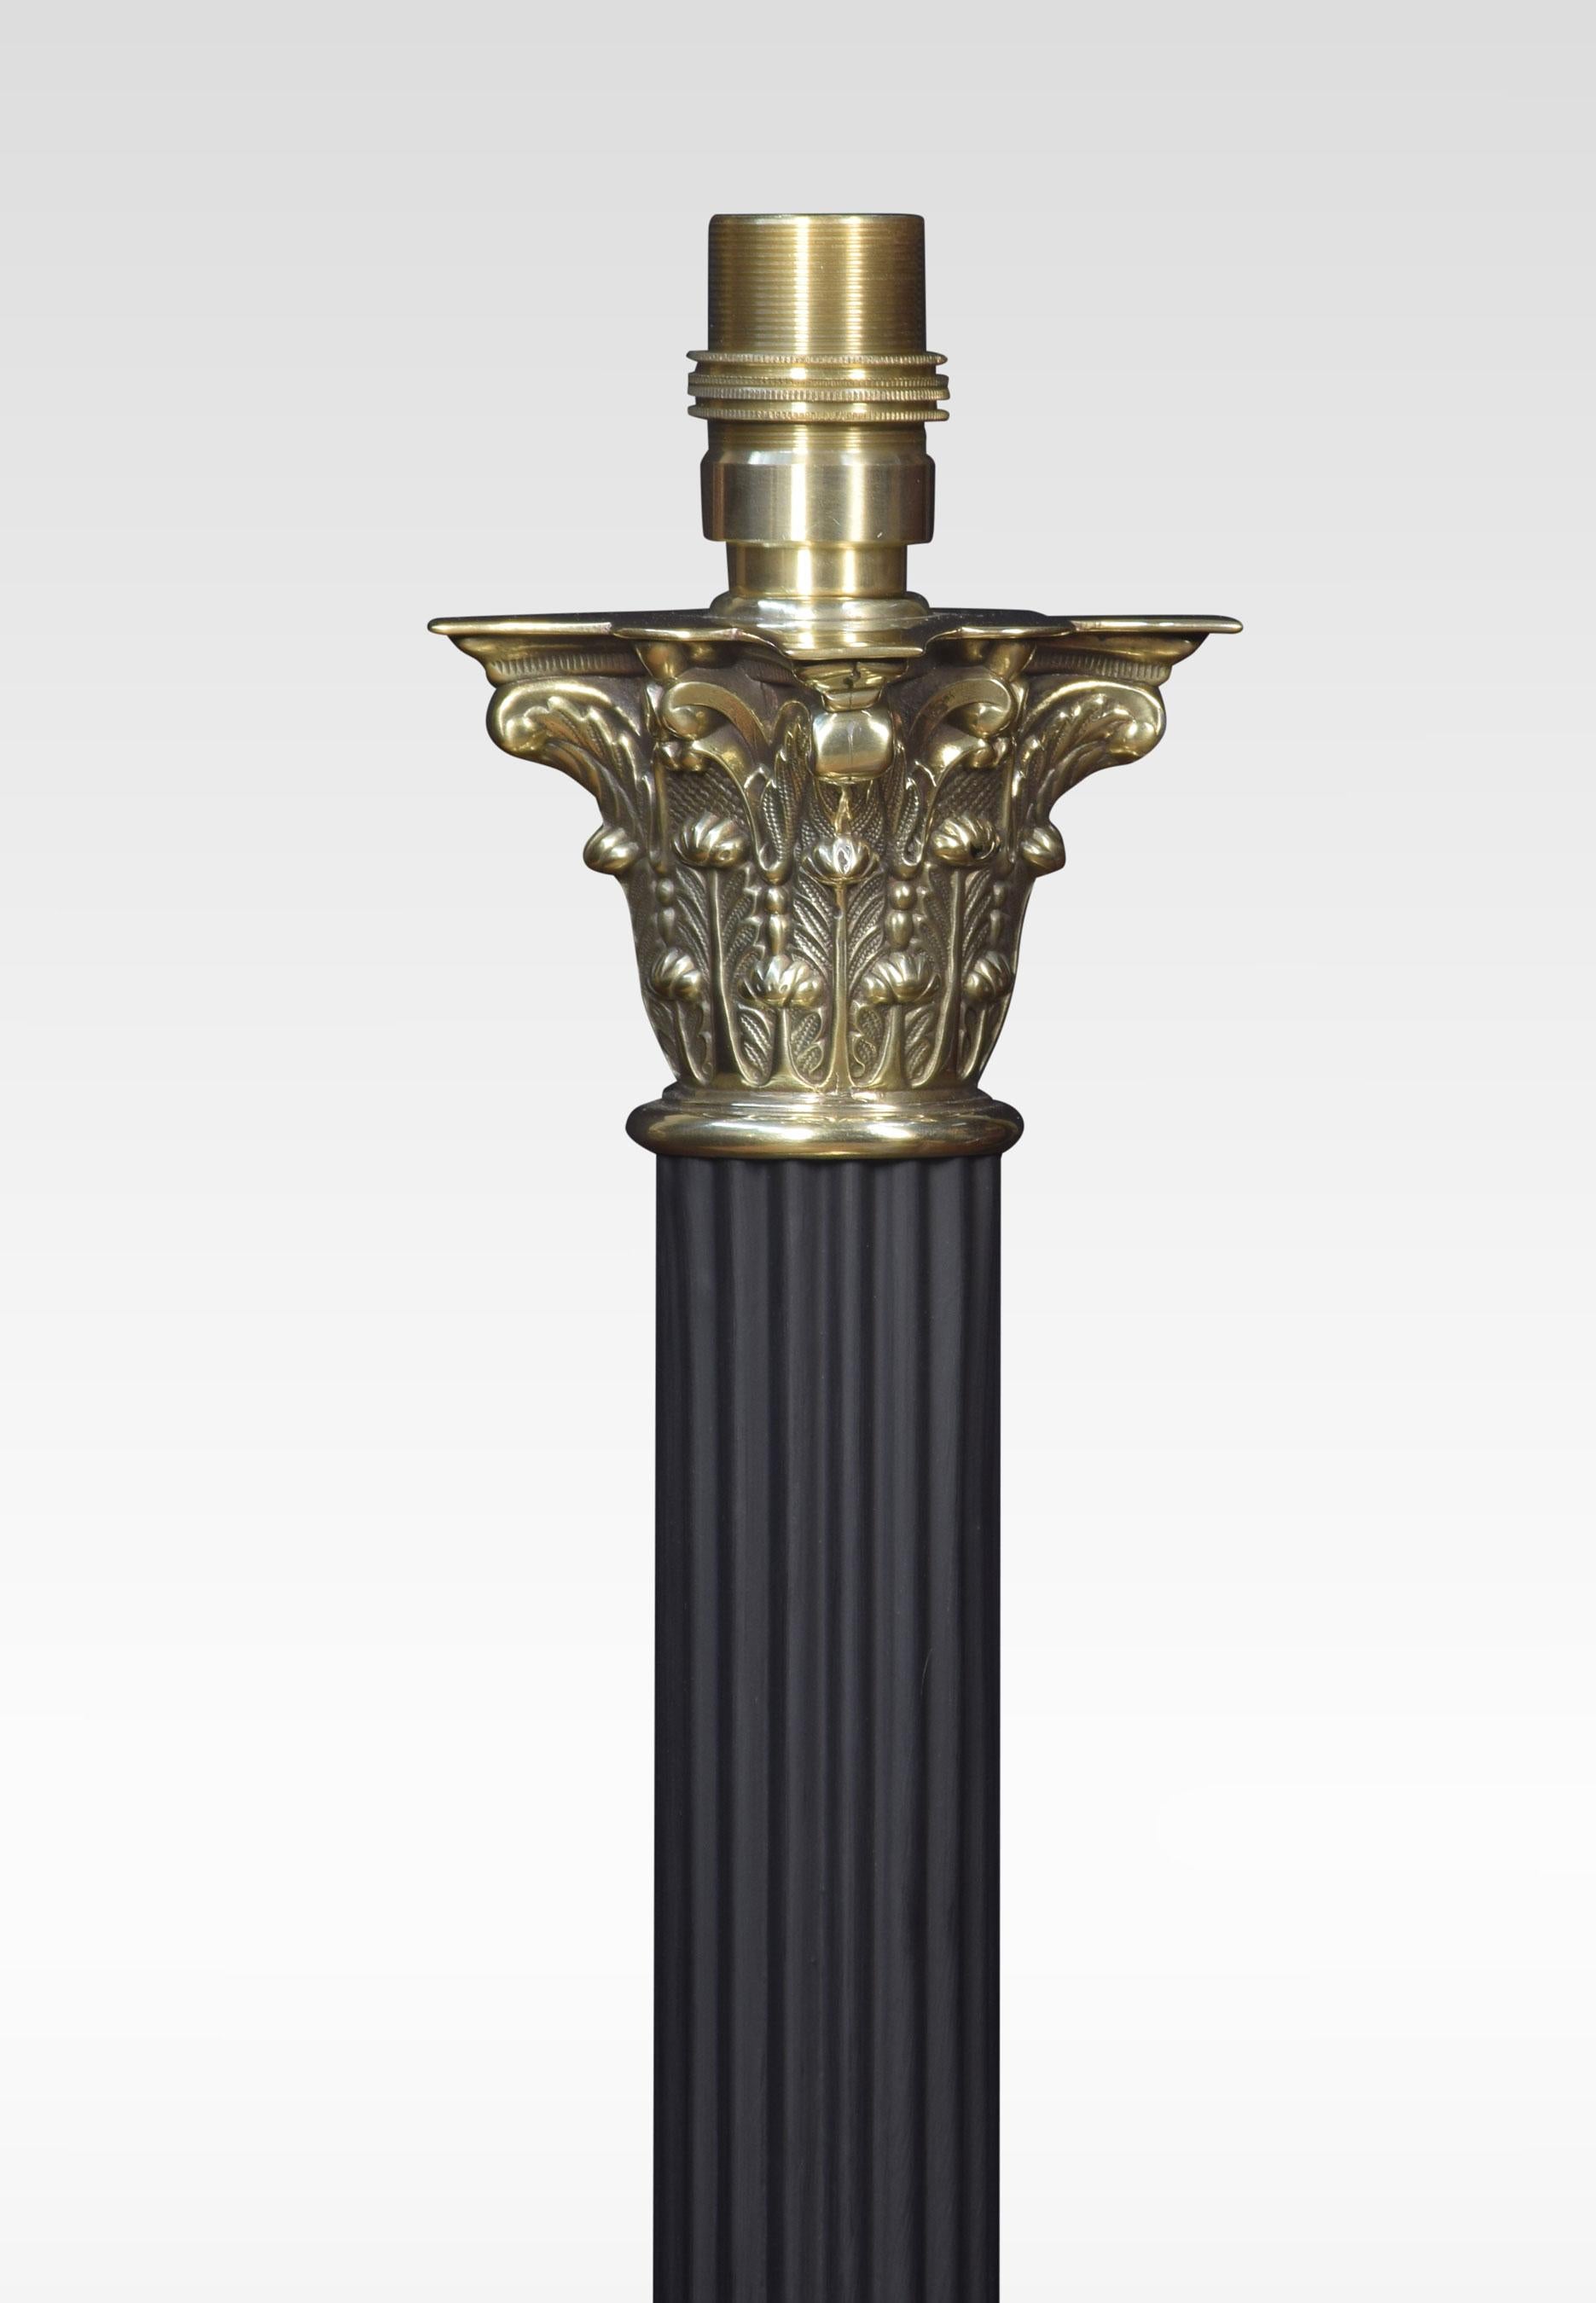 Brass table lamp, having a Corinthian column on a stepped square base. The lamp has been rewired.
Dimensions:
Height 19 inches
Width 7 inches
Depth 7 inches.